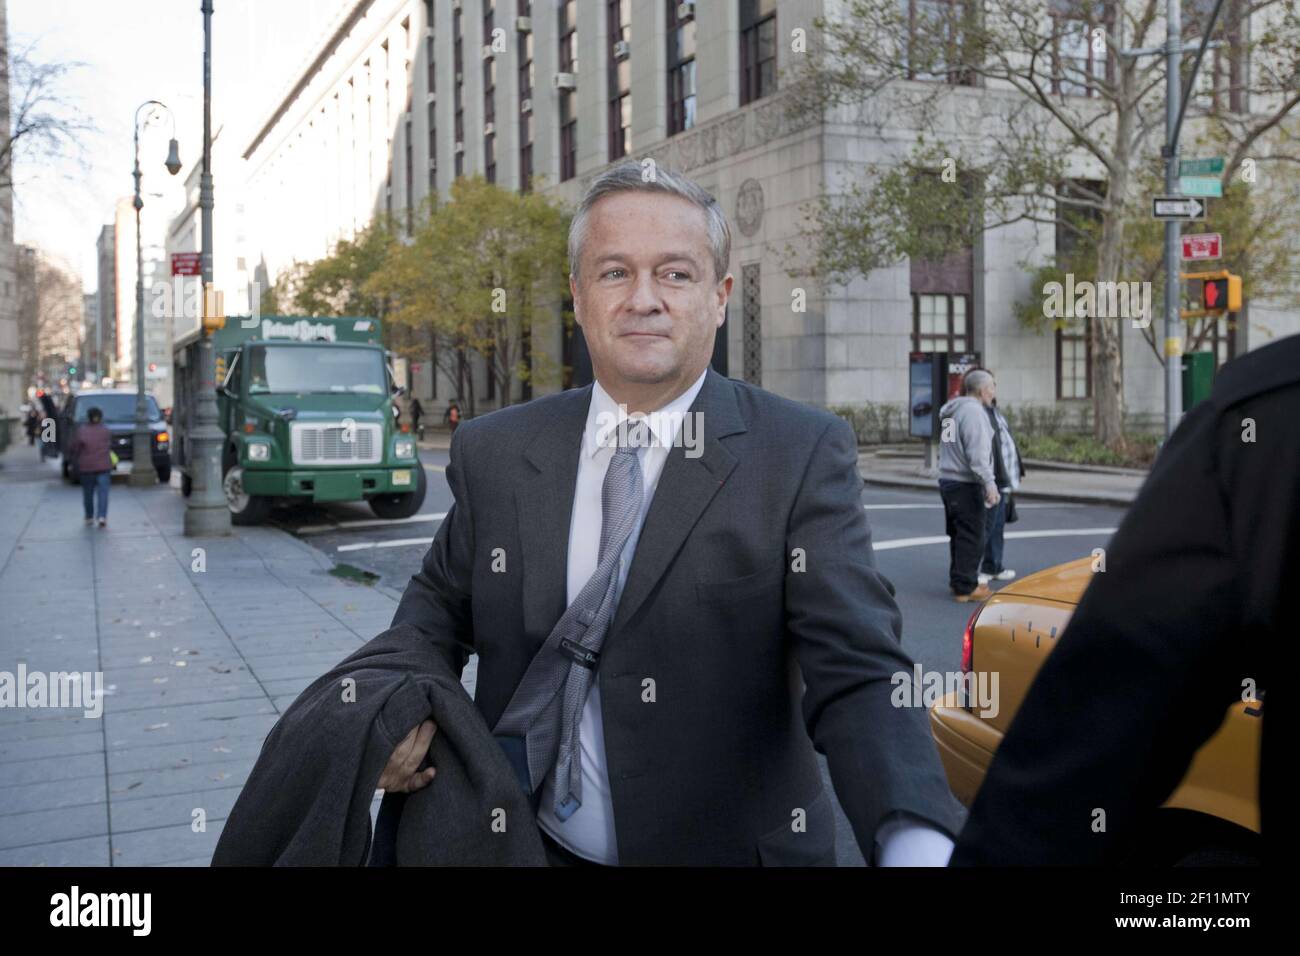 20 November 2009- New York, NY- Former Vivendi CEO Jean-Marie Messier arrives at the United States Courthouse in lower Manhattan to testify in a civil trial regarding the defrauding of shareholders by the French conglomerate. Photo Credit: Erik Sumption/Sipa Press/Messier.006/0911210452 Stock Photo